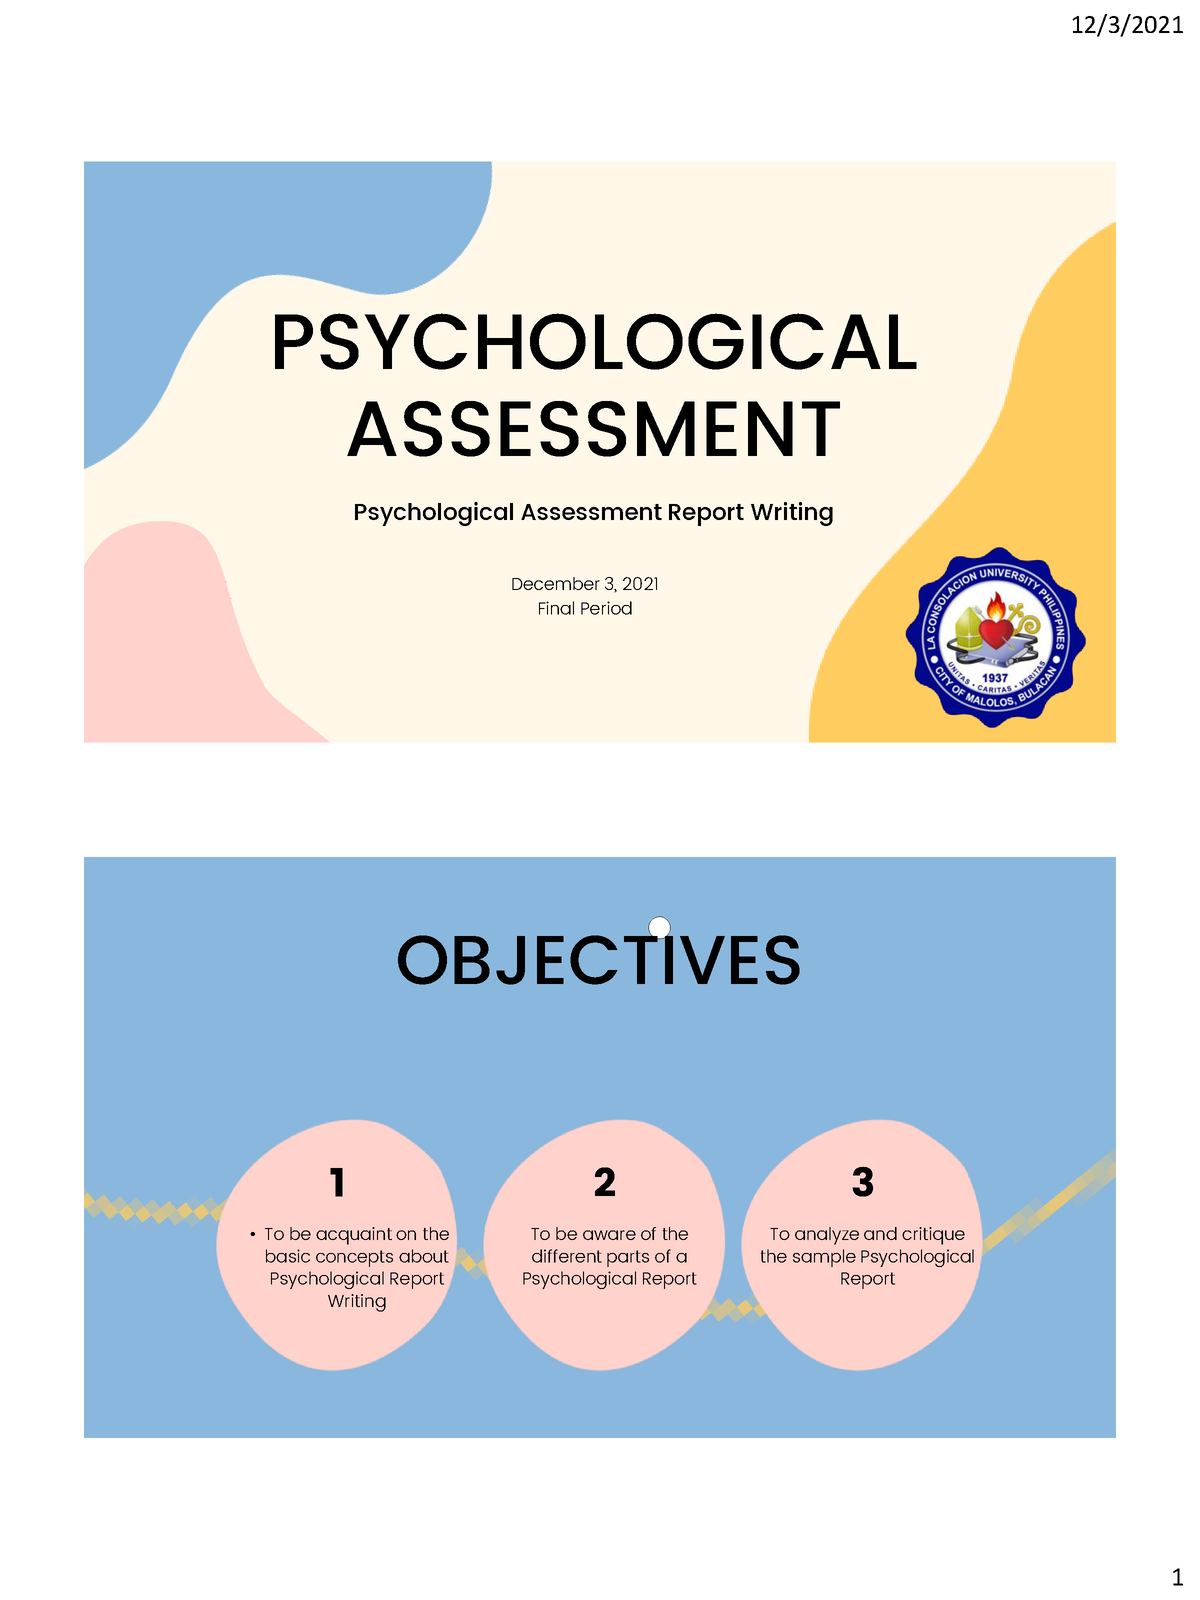 how to critically evaluate psychological research